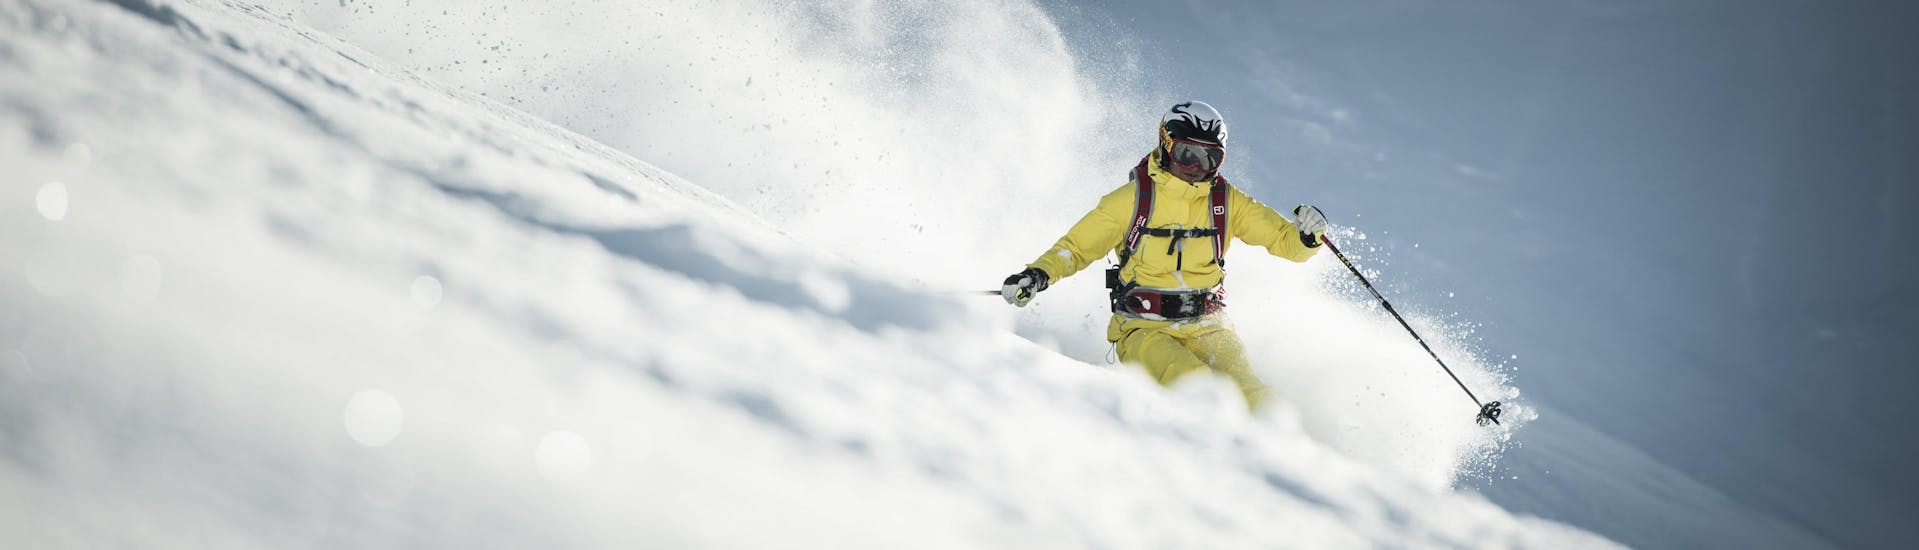 A skier is making his way down a deep powder snow slope during his off piste skiing lessons in Austria.